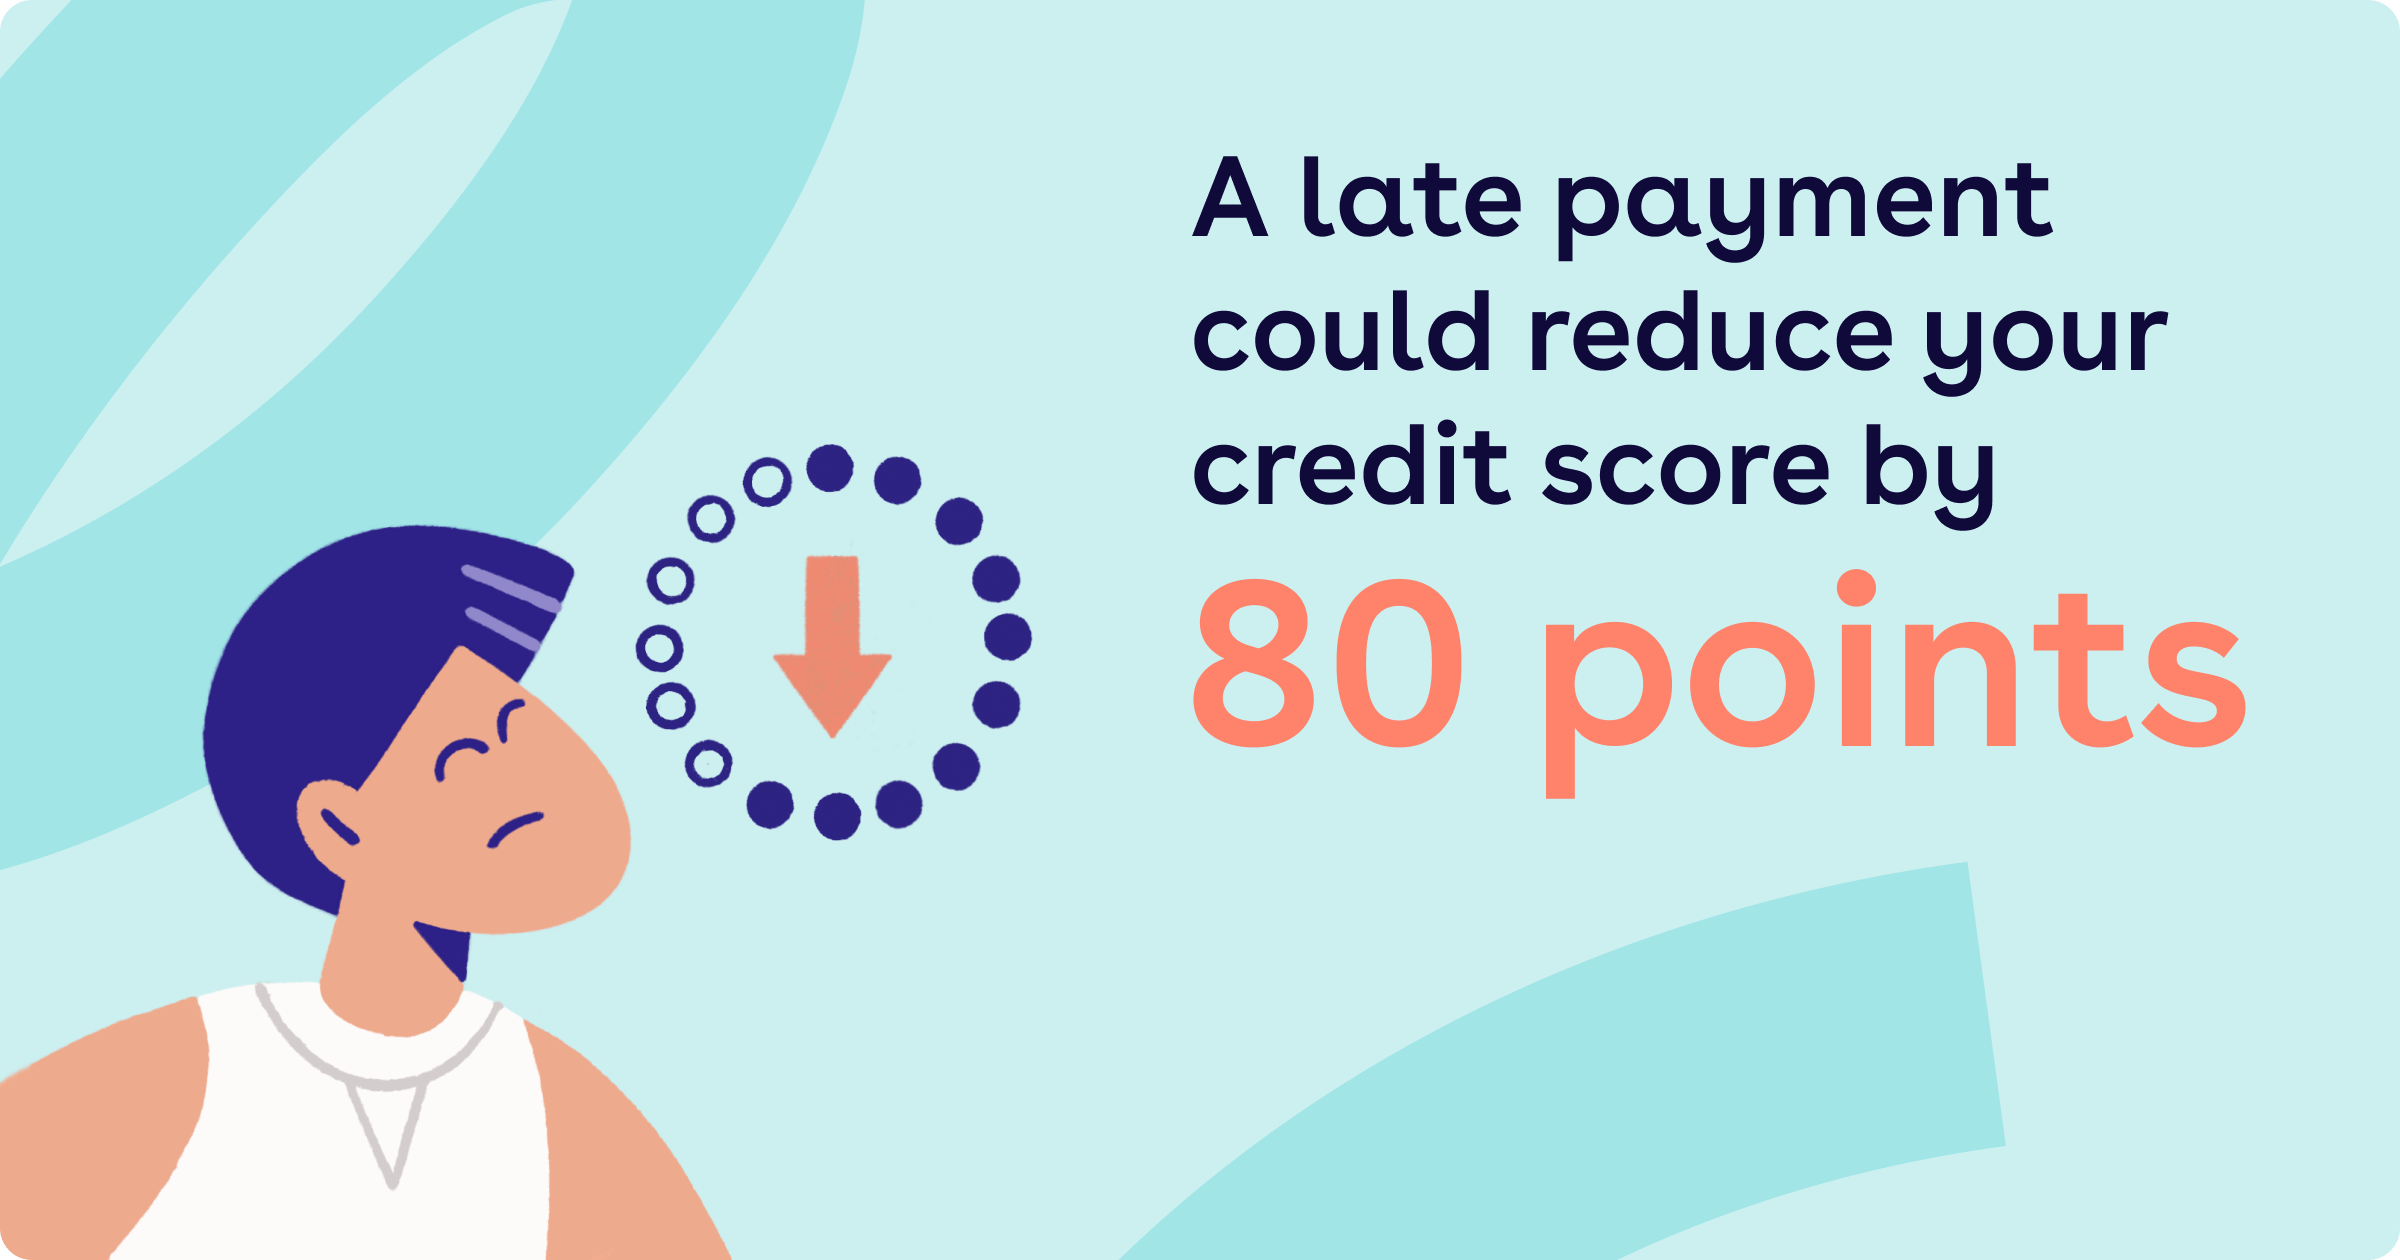 A late payment could reduce your credit score by 80 points